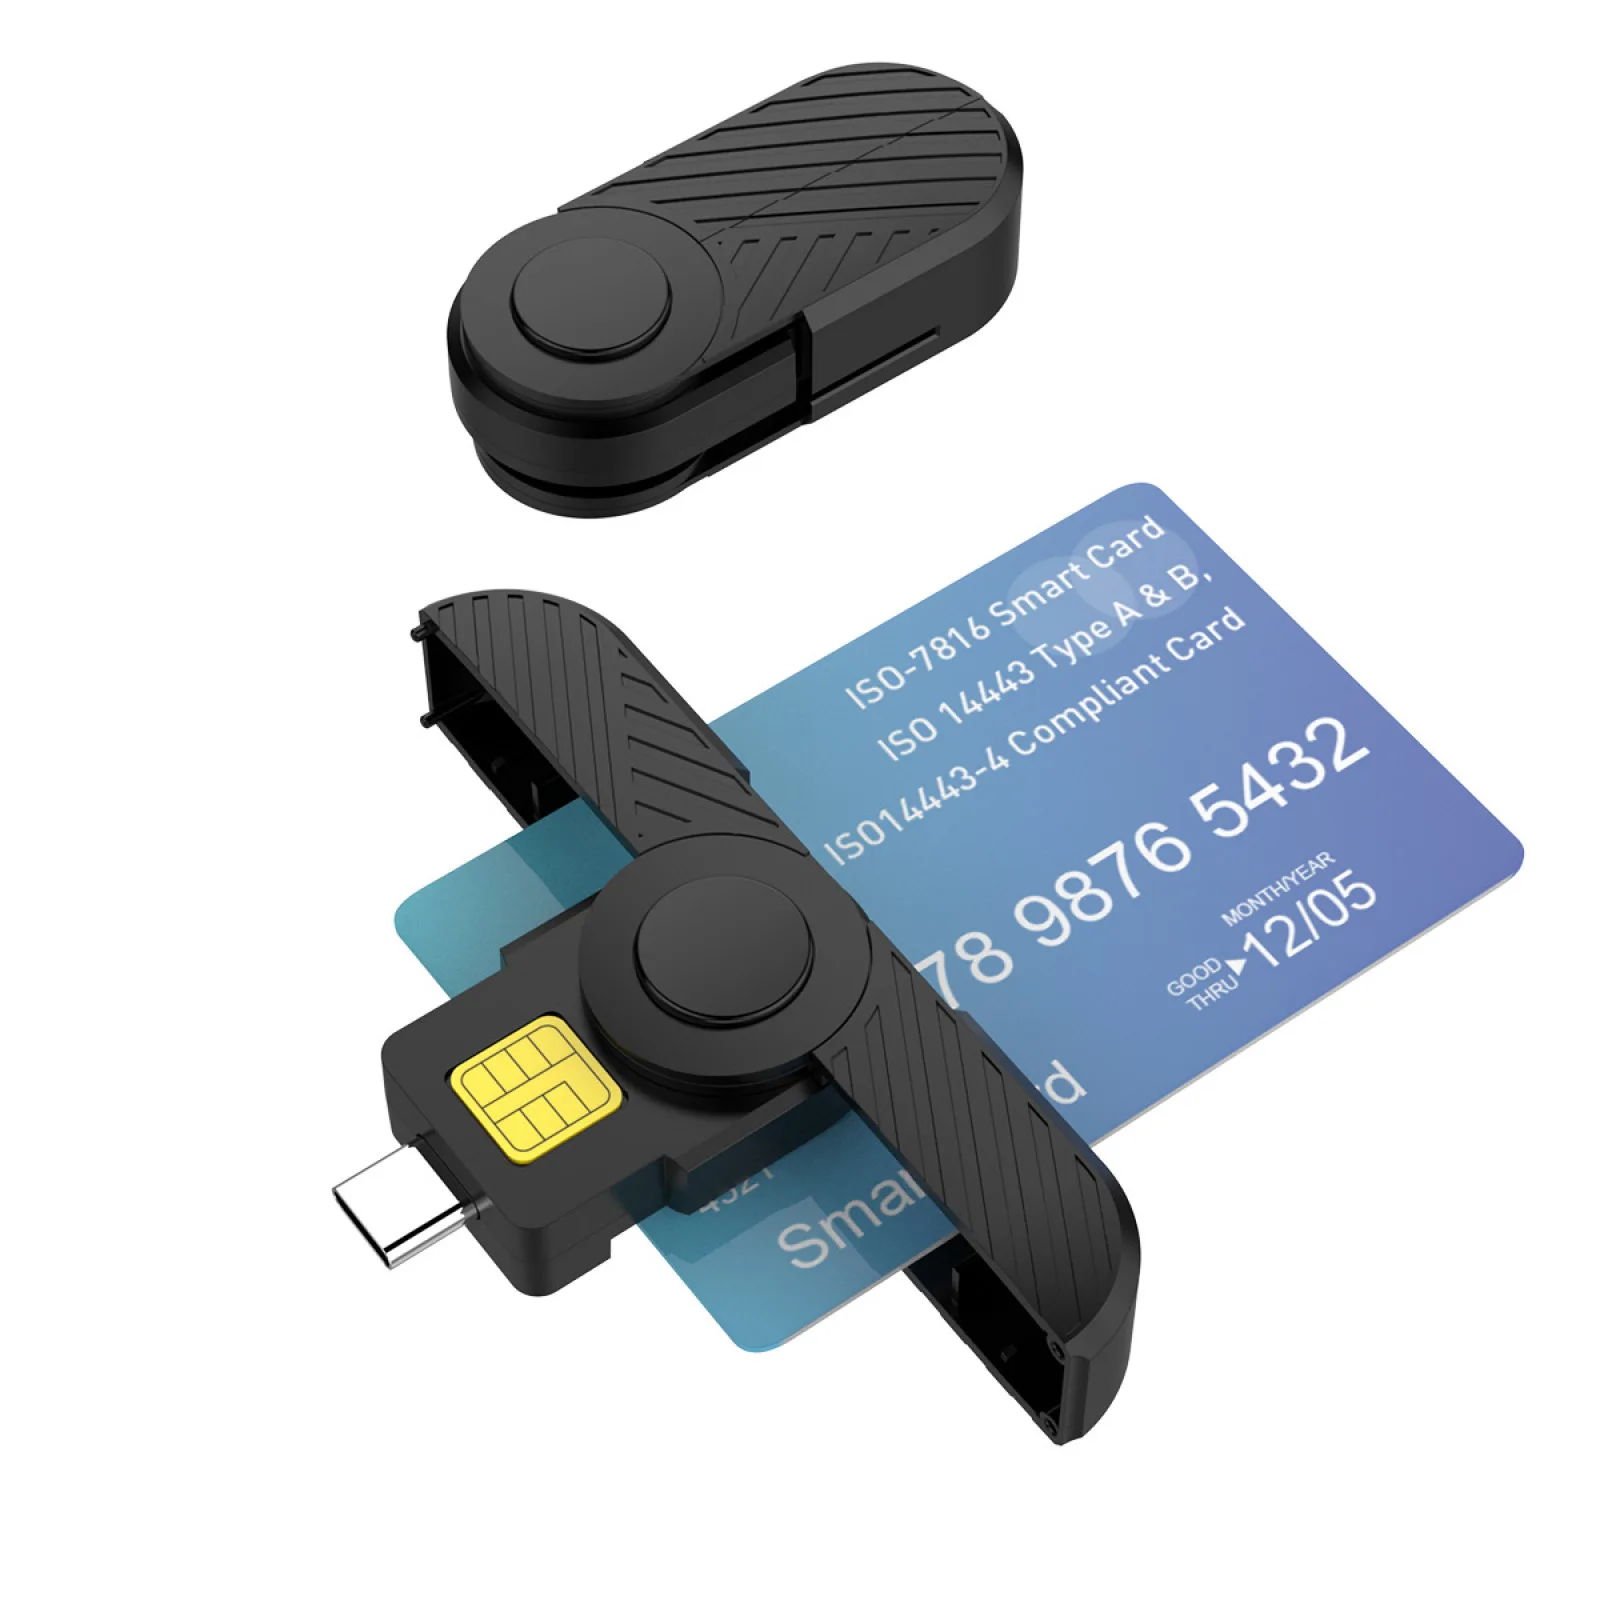 

Foldable DOD Type C Common Access CAC Smart Card SIM Card / IC Bank Chip Card Reader For Windows 10 8 7 (32/64 bit) Plug & Play